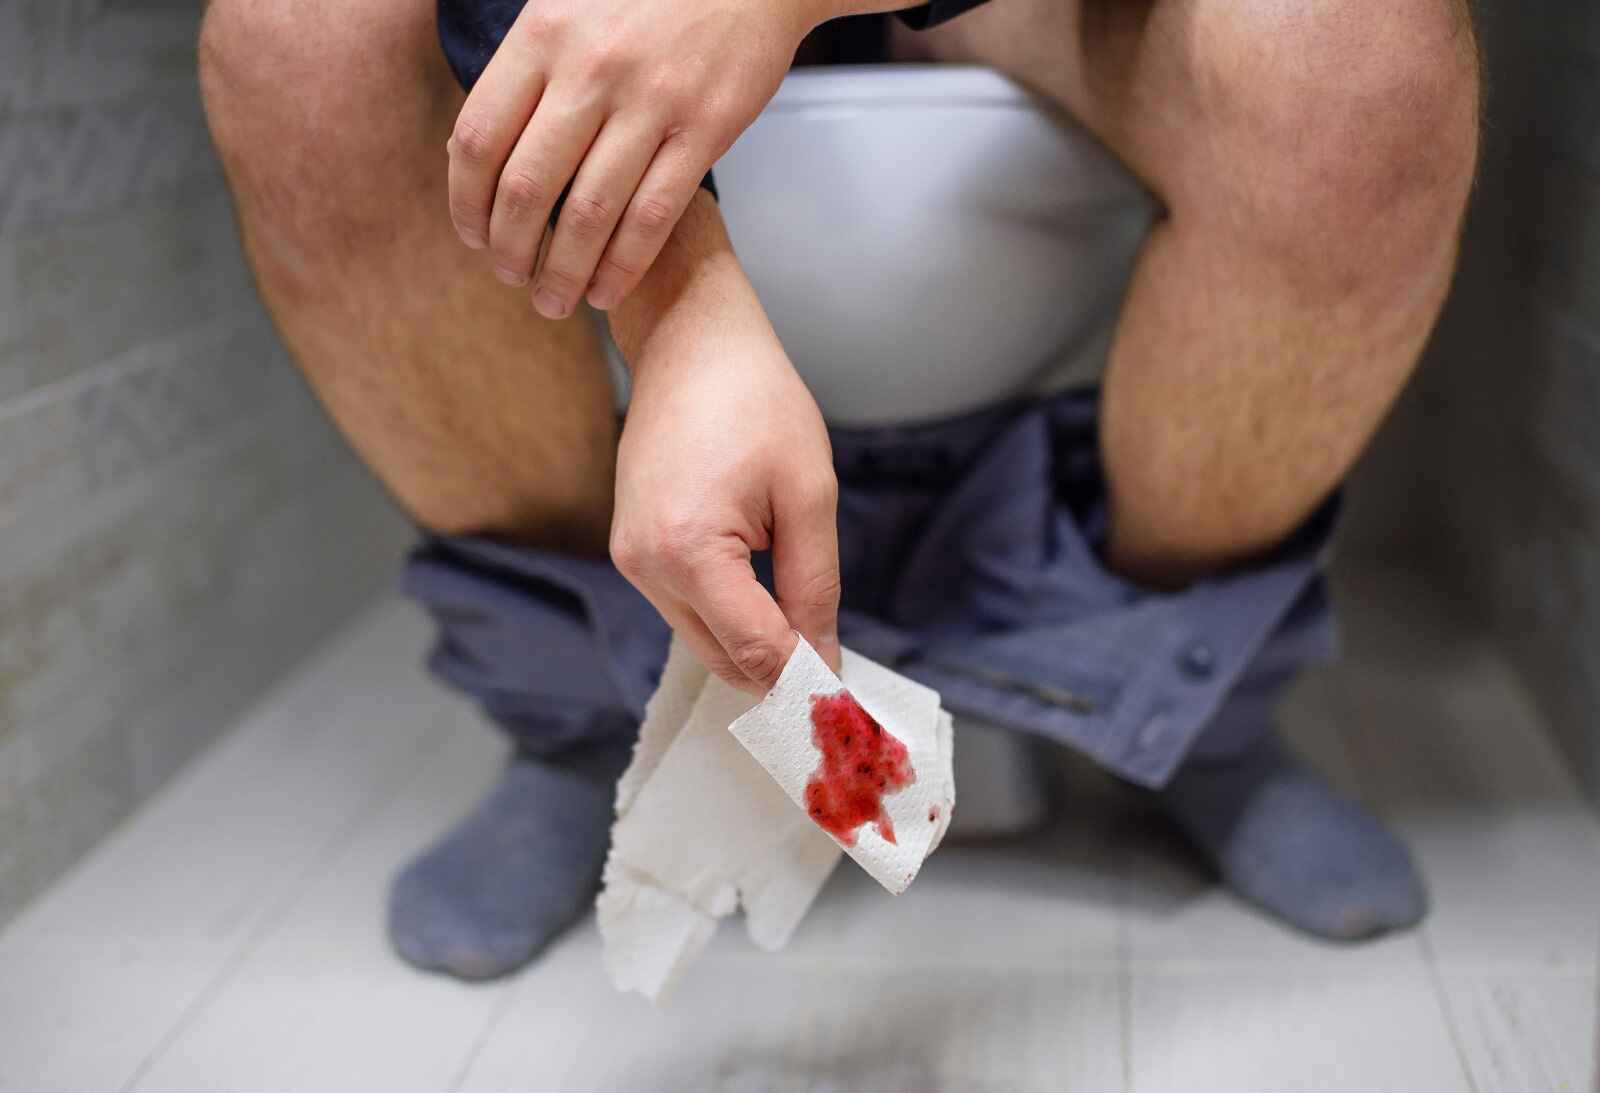 Symptoms of blood in stool include bright red blood, dark red blood, and mucus, often accompanied by pain or diarrhea, requiring medical attention.